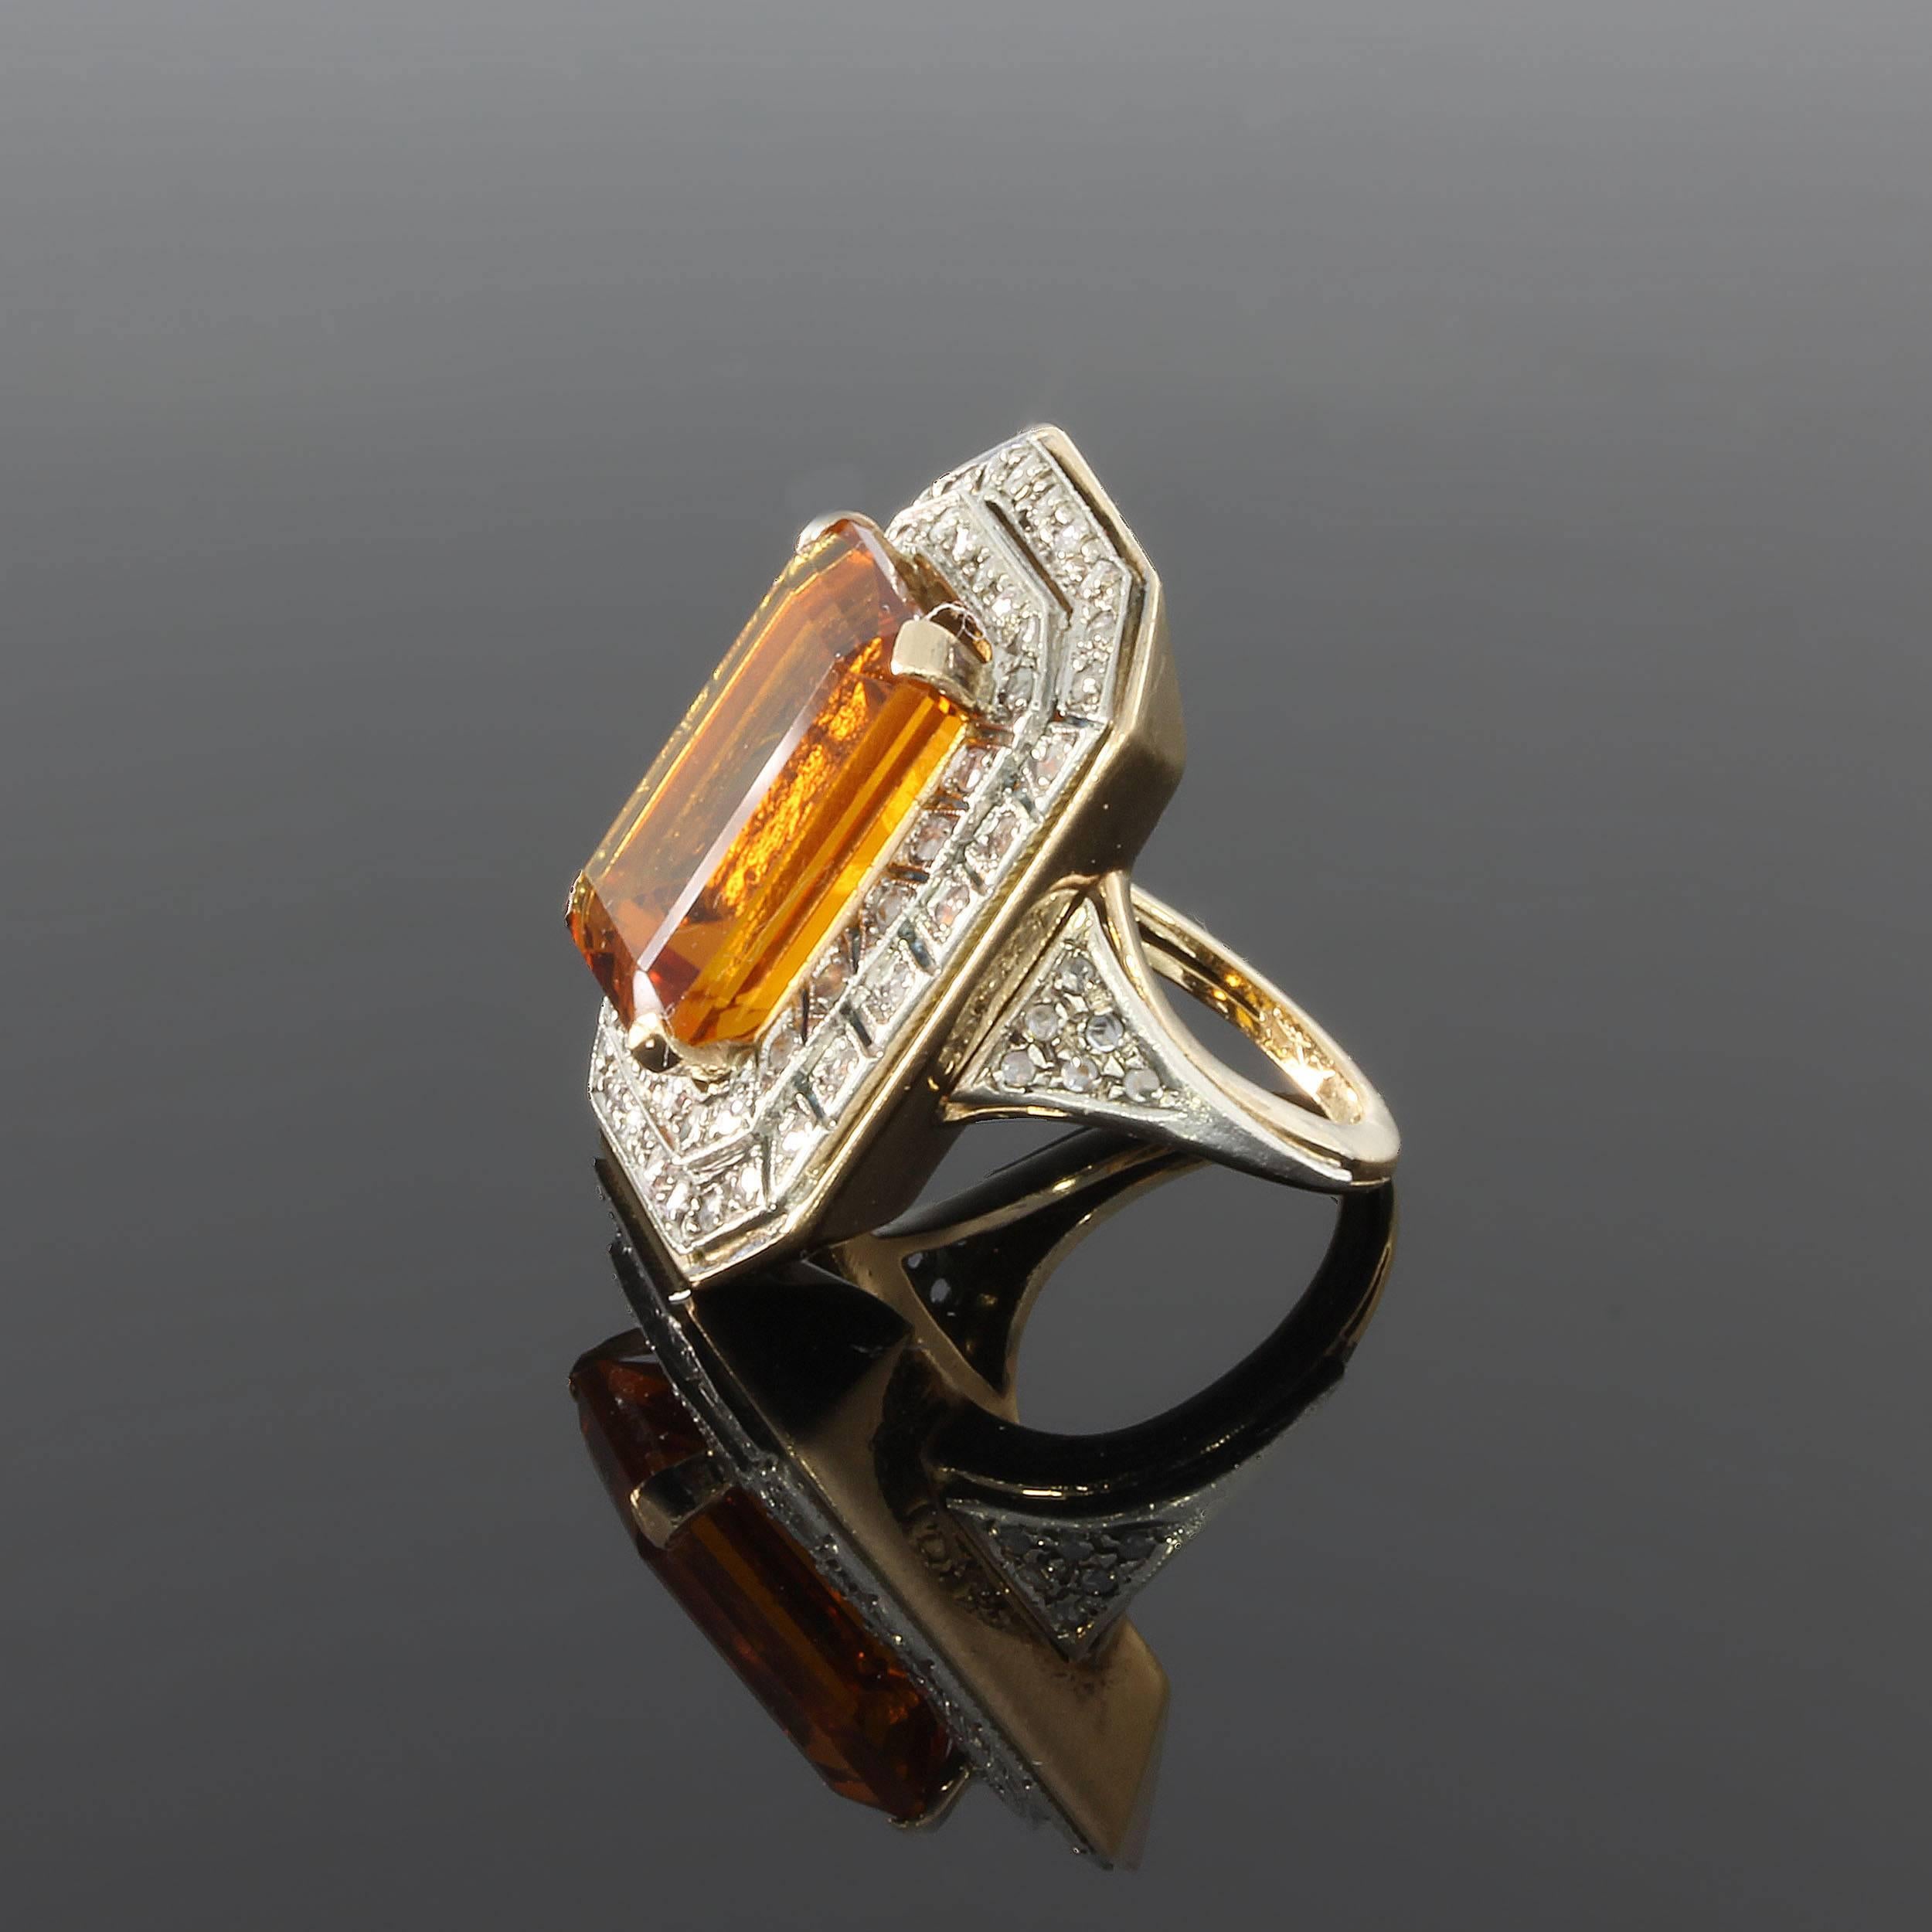 Set with precious citrine in emerald cut 0.63 x 0.43 in ( 1,6 x 1,1 cm ), height 0.12 in ( 0,3 cm ). 
Decorated with 52 diamonds in brilliant cut weighing ca. 1,5 ct. Mounted in 14K yellow gold and silver. 
Total weight 19,87 grams. Length 1.12 in (